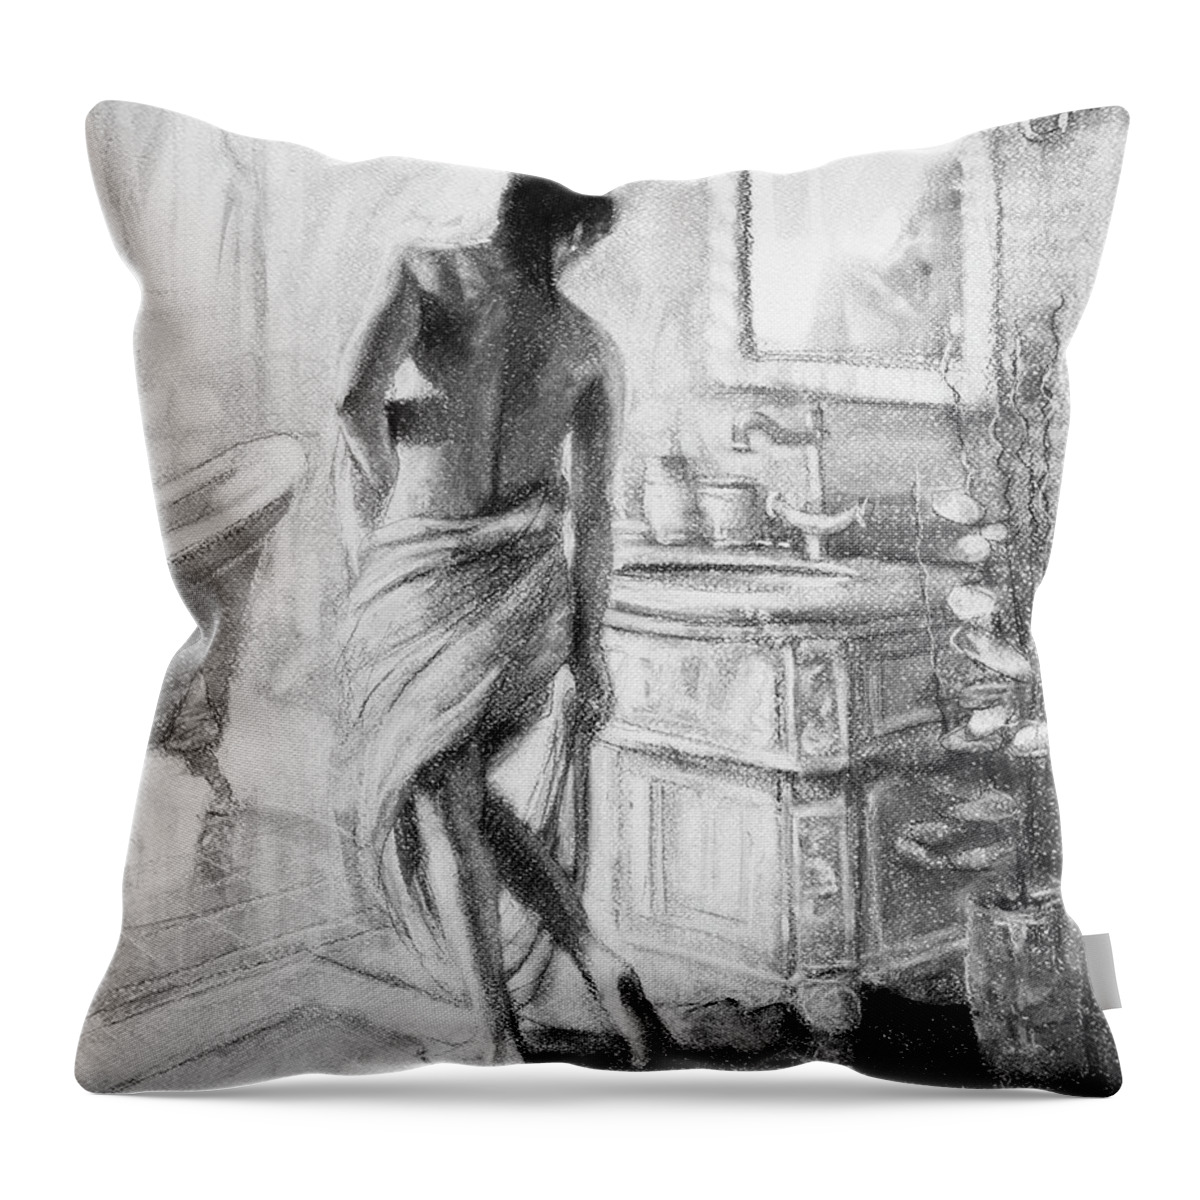 Bath Throw Pillow featuring the painting Reverie by Steve Henderson